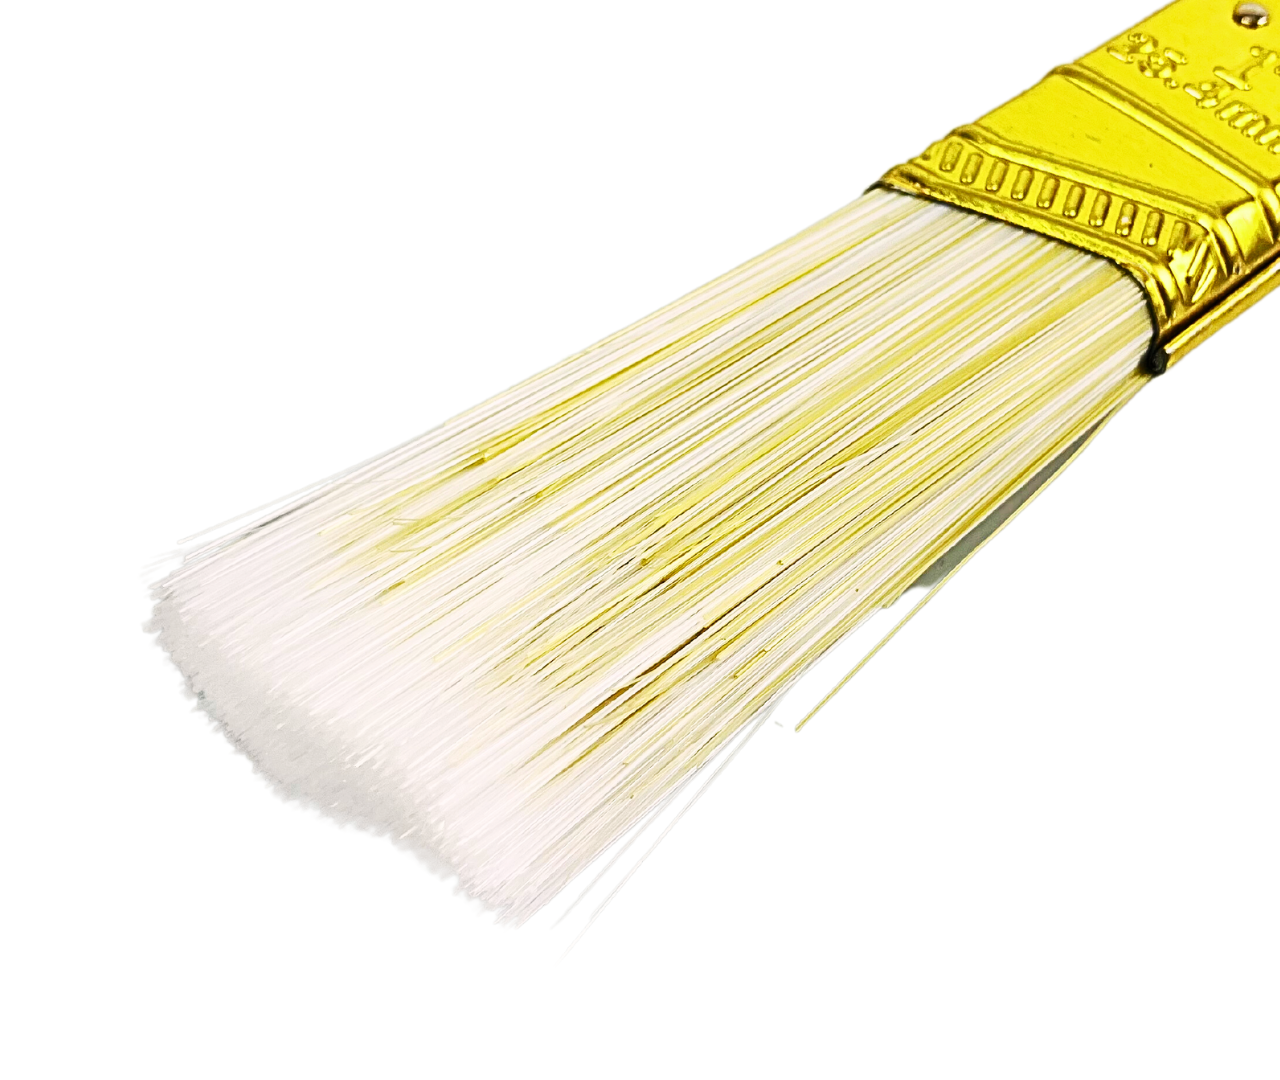 1" Wide Bristle Brush for House Painting, Varnish or Lacquer (Pack of: 2) - TZ63-28440-Z02